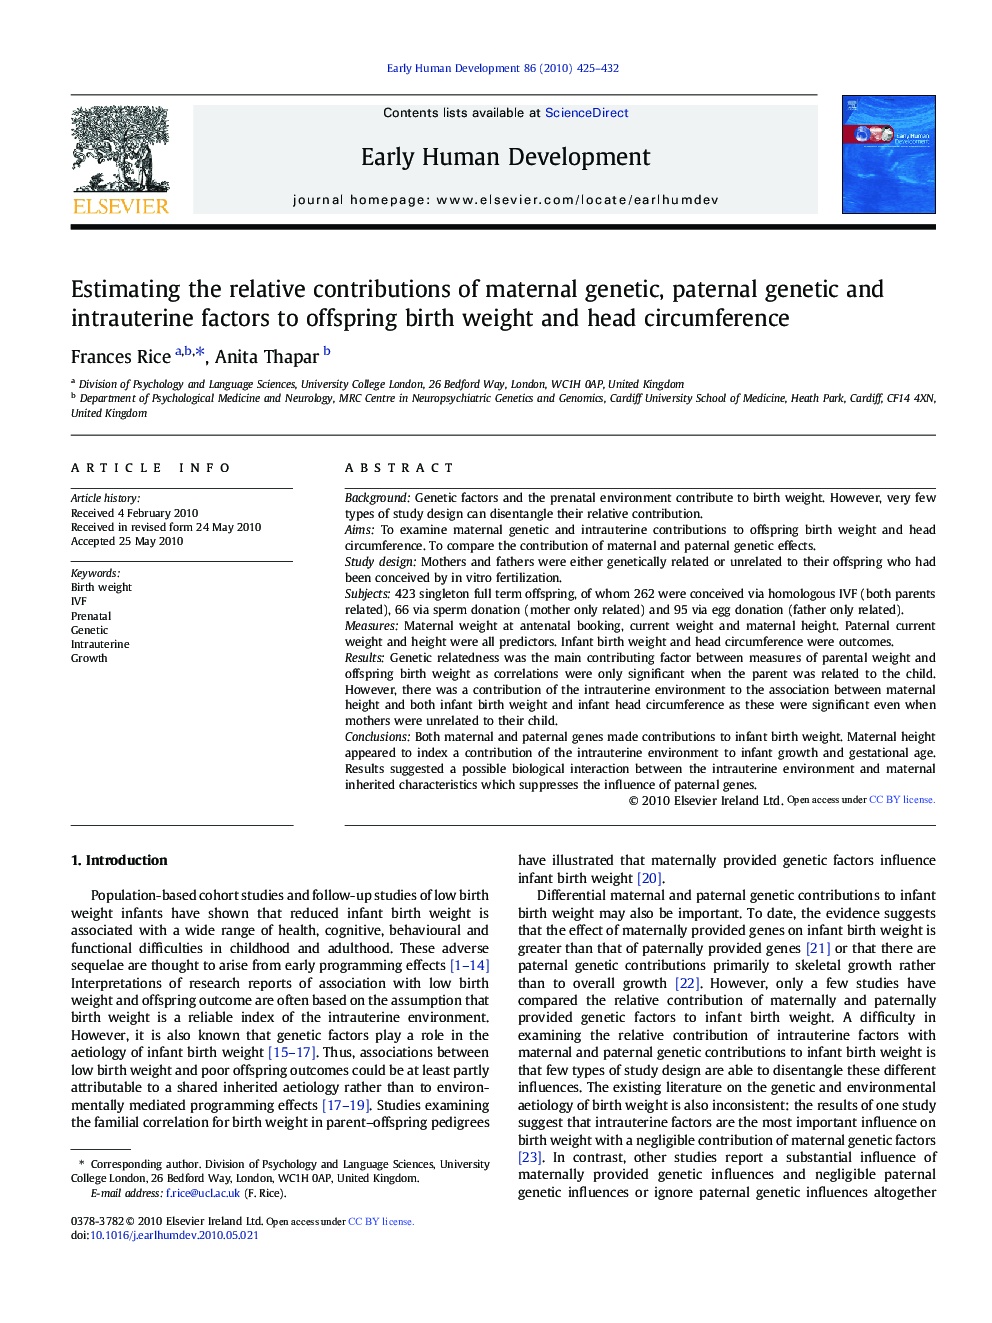 Estimating the relative contributions of maternal genetic, paternal genetic and intrauterine factors to offspring birth weight and head circumference